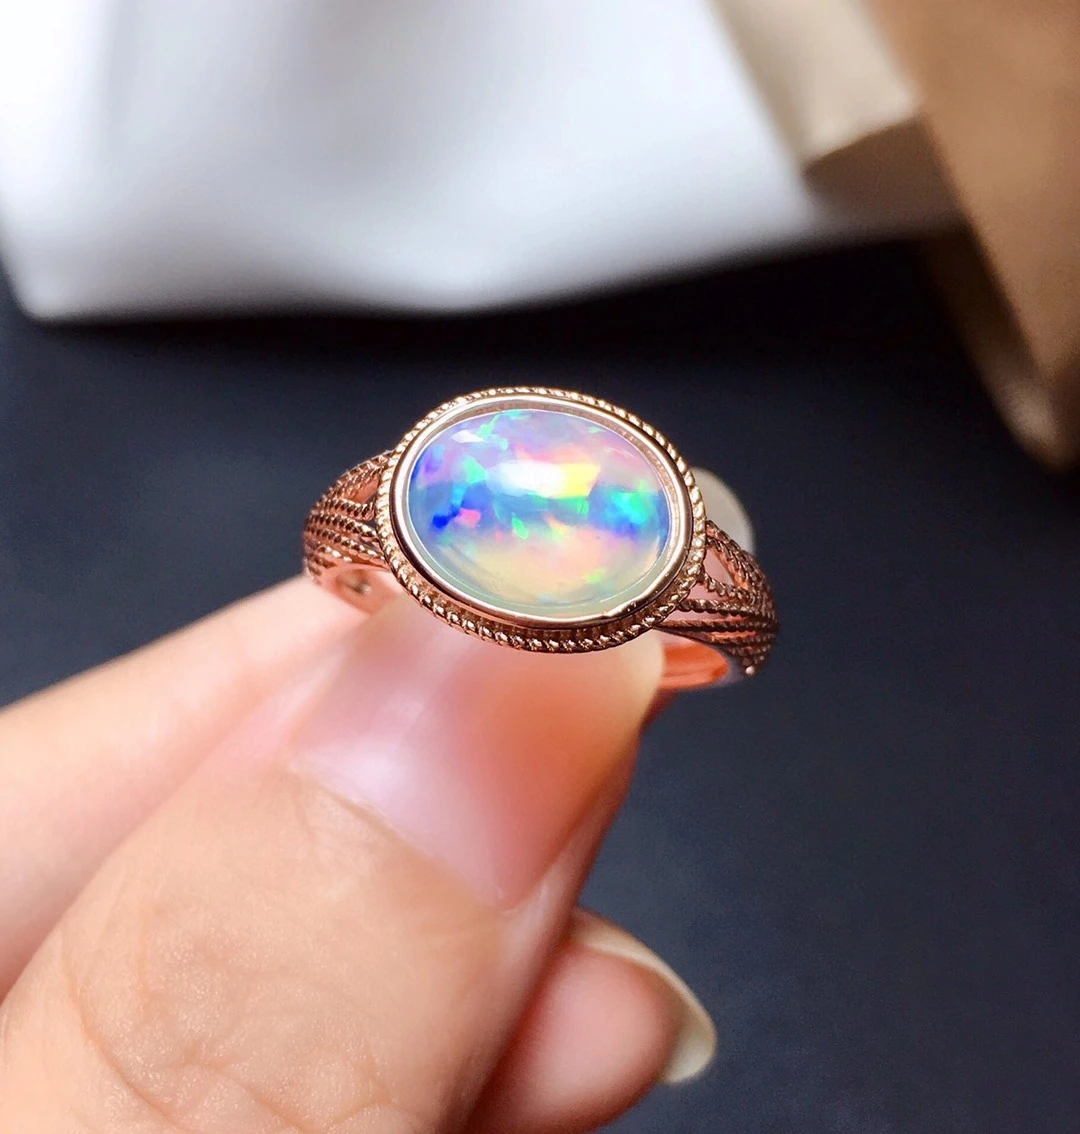 

2021 new natural opal gemstone ring for women real 925 silver fireworks color natural gem birthday party gift l 7*9mm size oval